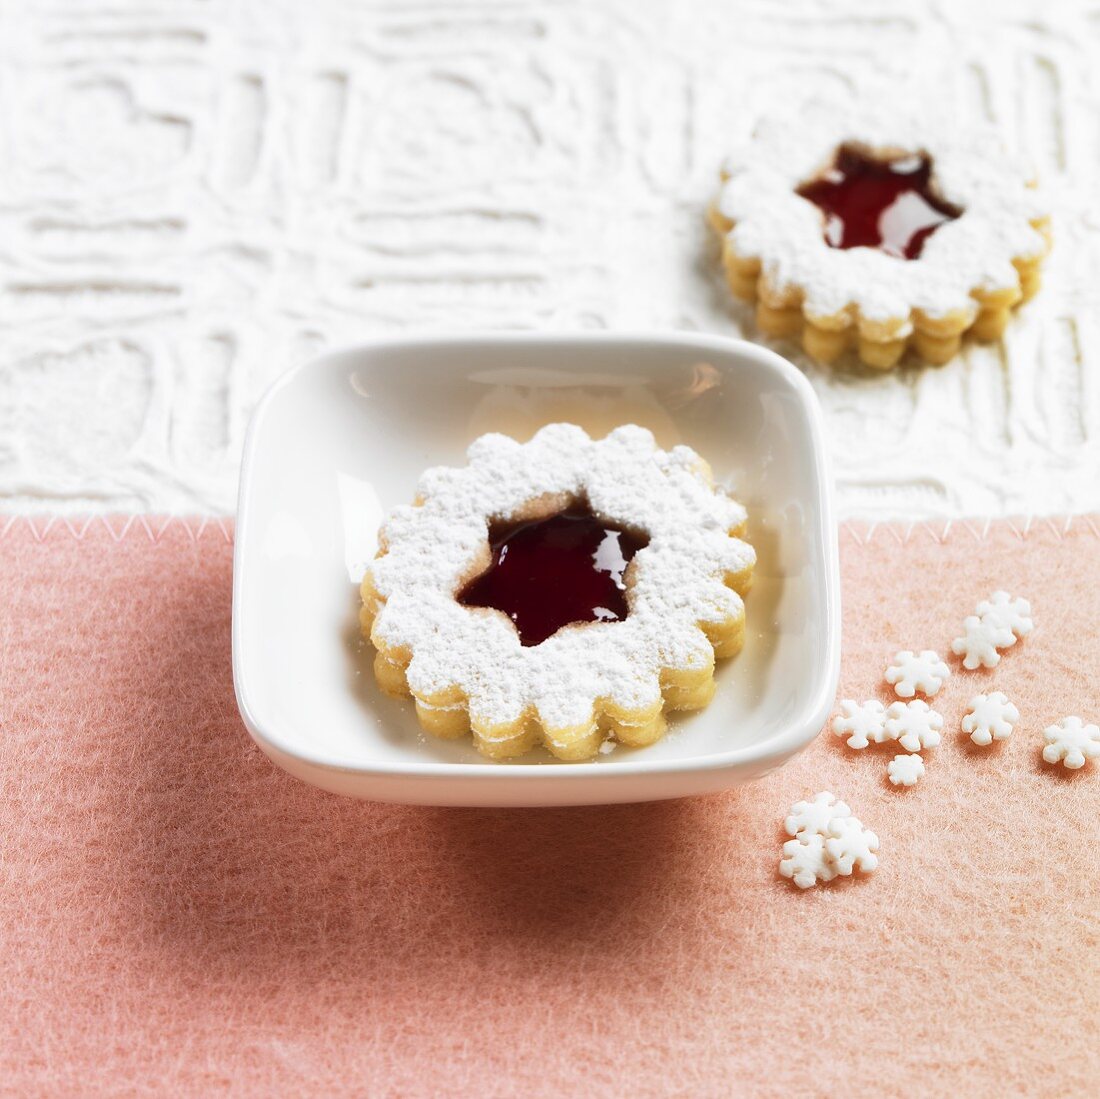 Linzer biscuits (nutty shortcrust jam sandwich biscuits with holes on top) with redcurrant jam